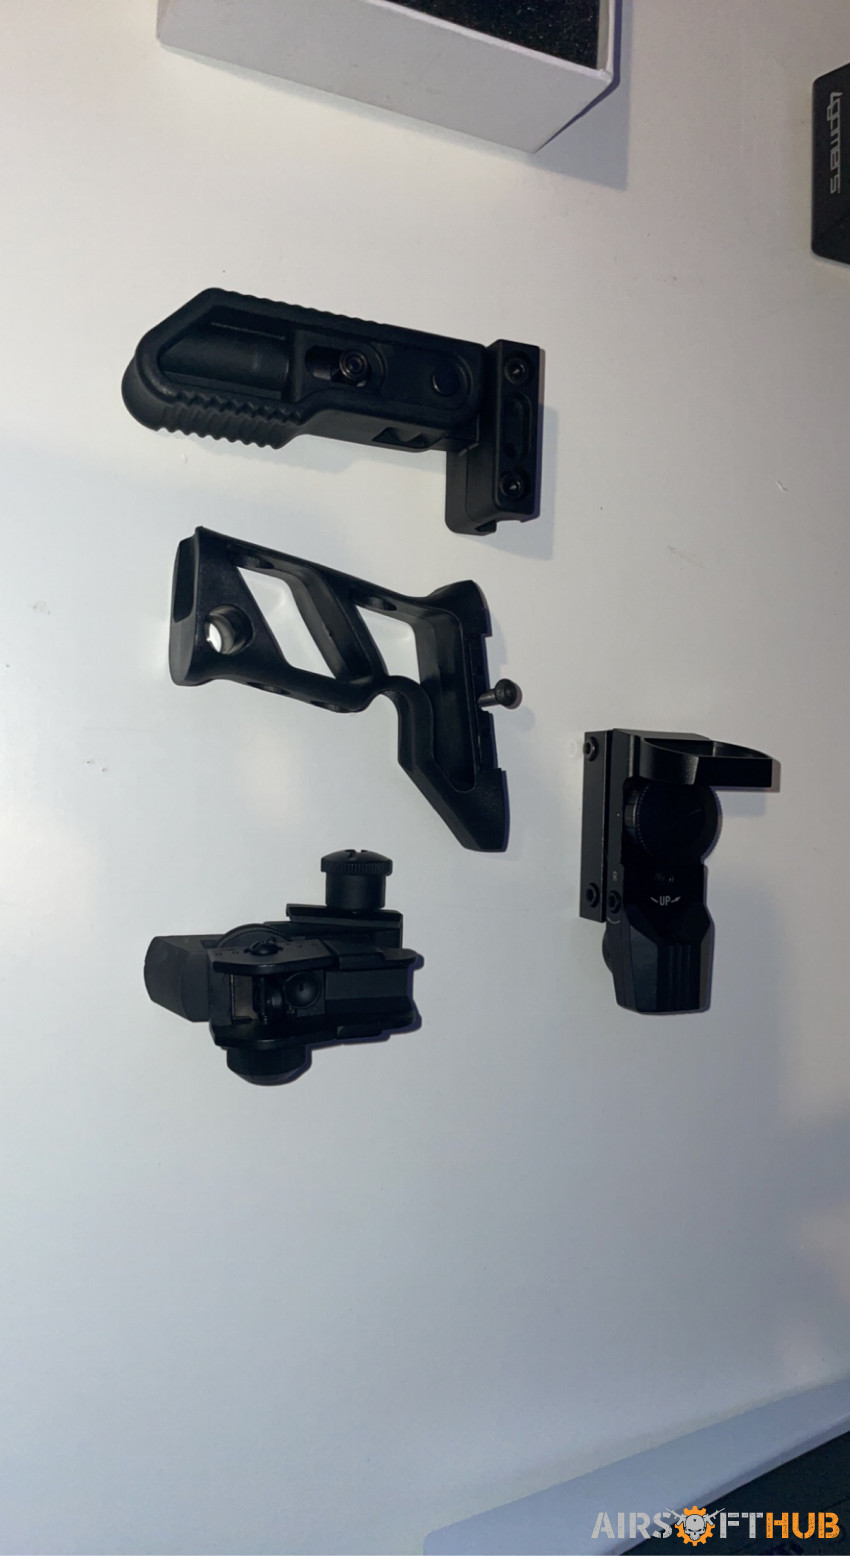 Airsoft Accessories - Used airsoft equipment